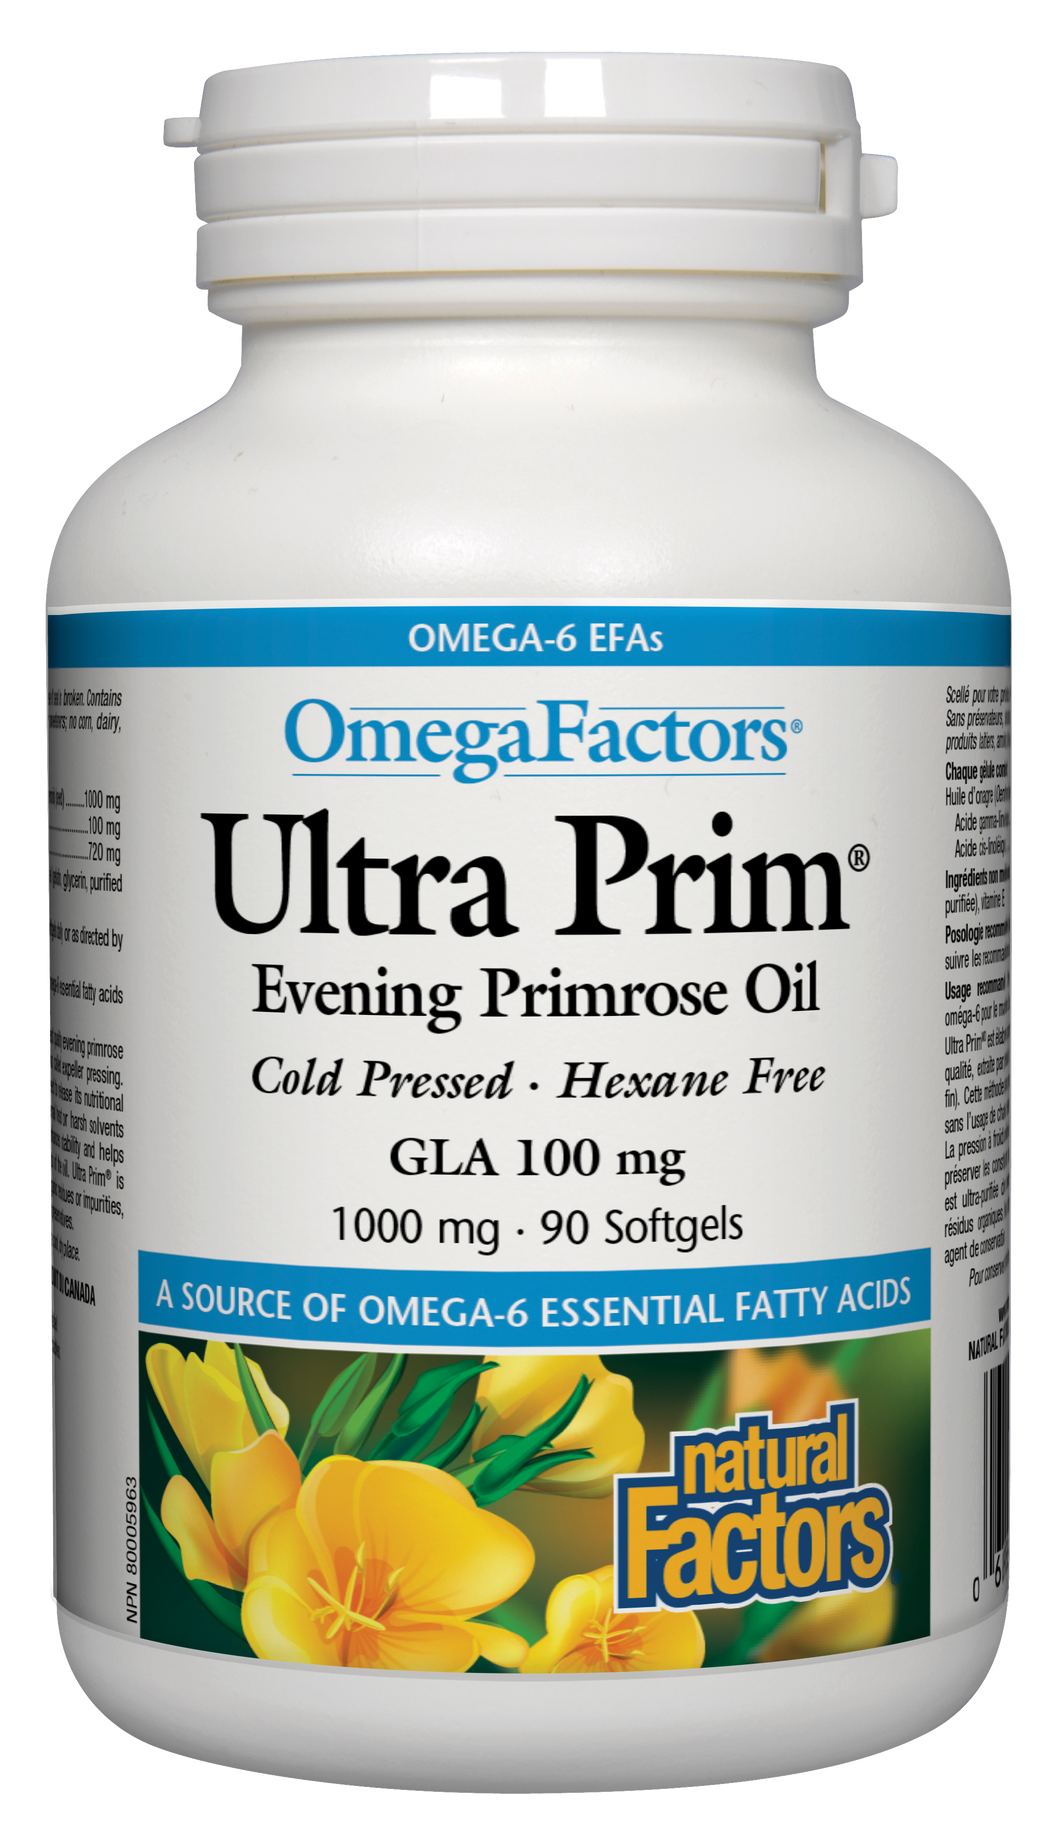 OmegaFactors Ultra Prim Evening Primrose Oil is a rich source of gamma-linolenic acid for optimal health. This ultra-purified, cold-pressed evening primrose oil is a great option for improving hormone balance, relieving inflammation, and nourishing the skin, as well as supporting cardiovascular and eye health.